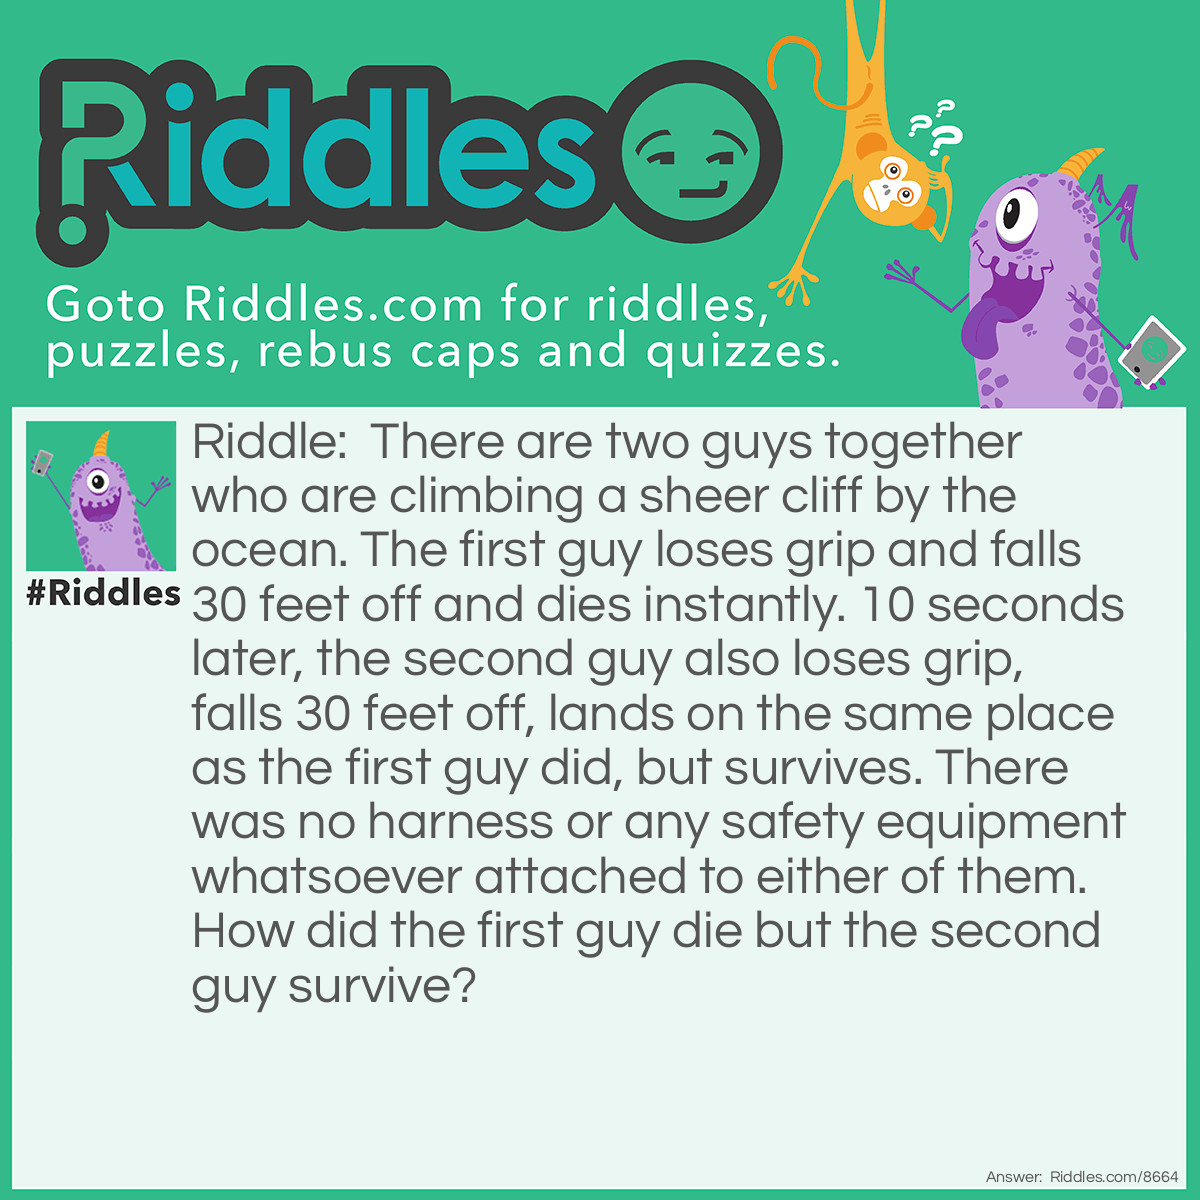 Riddle: There are two guys together who are climbing a sheer cliff by the ocean. The first guy loses grip and falls 30 feet off and dies instantly. 10 seconds later, the second guy also loses grip, falls 30 feet off, lands on the same place as the first guy did, but survives. There was no harness or any safety equipment whatsoever attached to either of them. How did the first guy die but the second guy survive? Answer: The first guy was extremely fat, and landed on his back on a large rock above the water’s surface. The second guy landed on the first guy’s belly so the softer landing saved him.